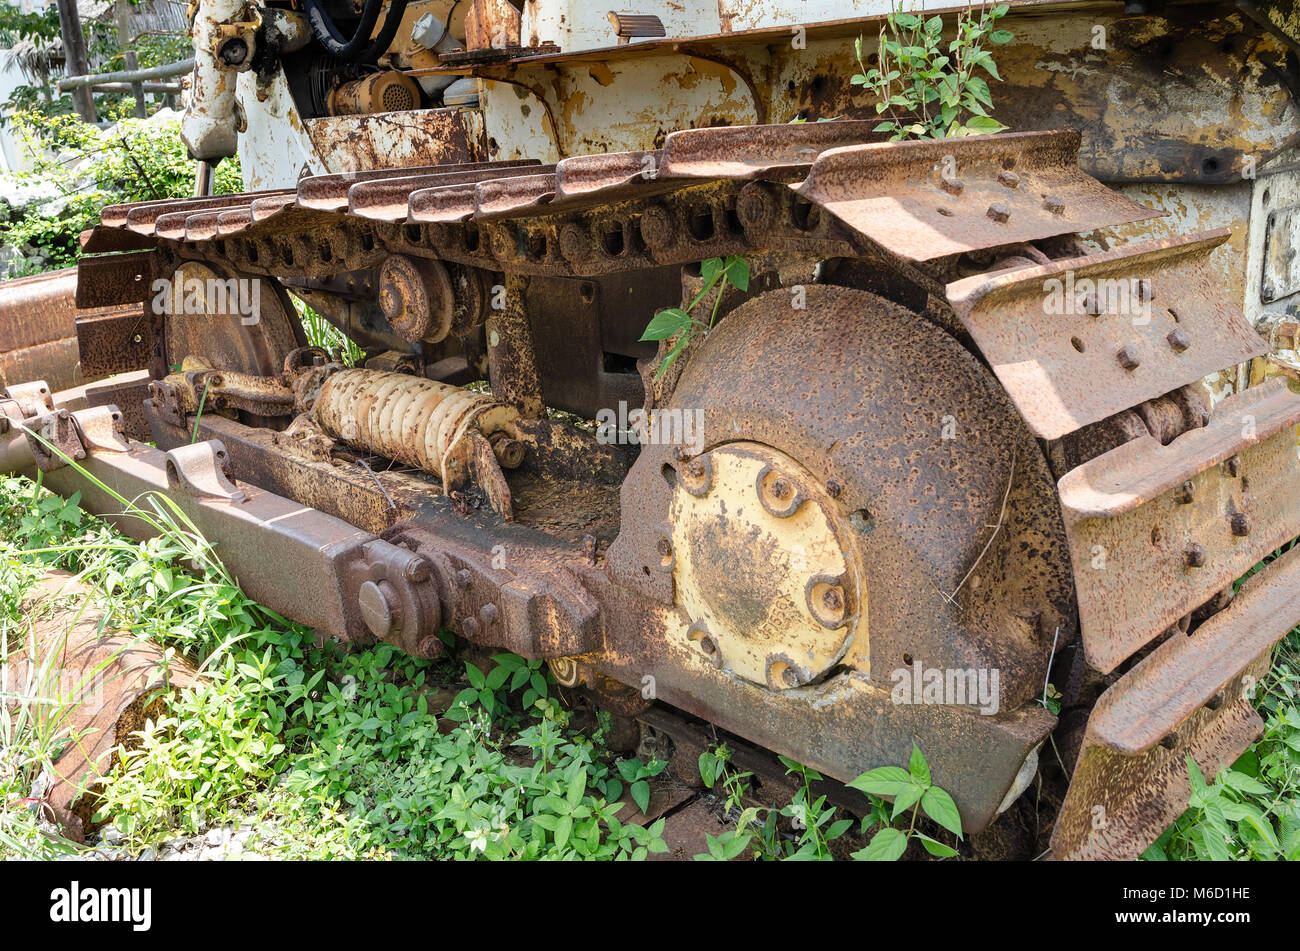 vintage old caterpillar track of a tractor - Old, rusty, and weathered bulldozer track Stock Photo